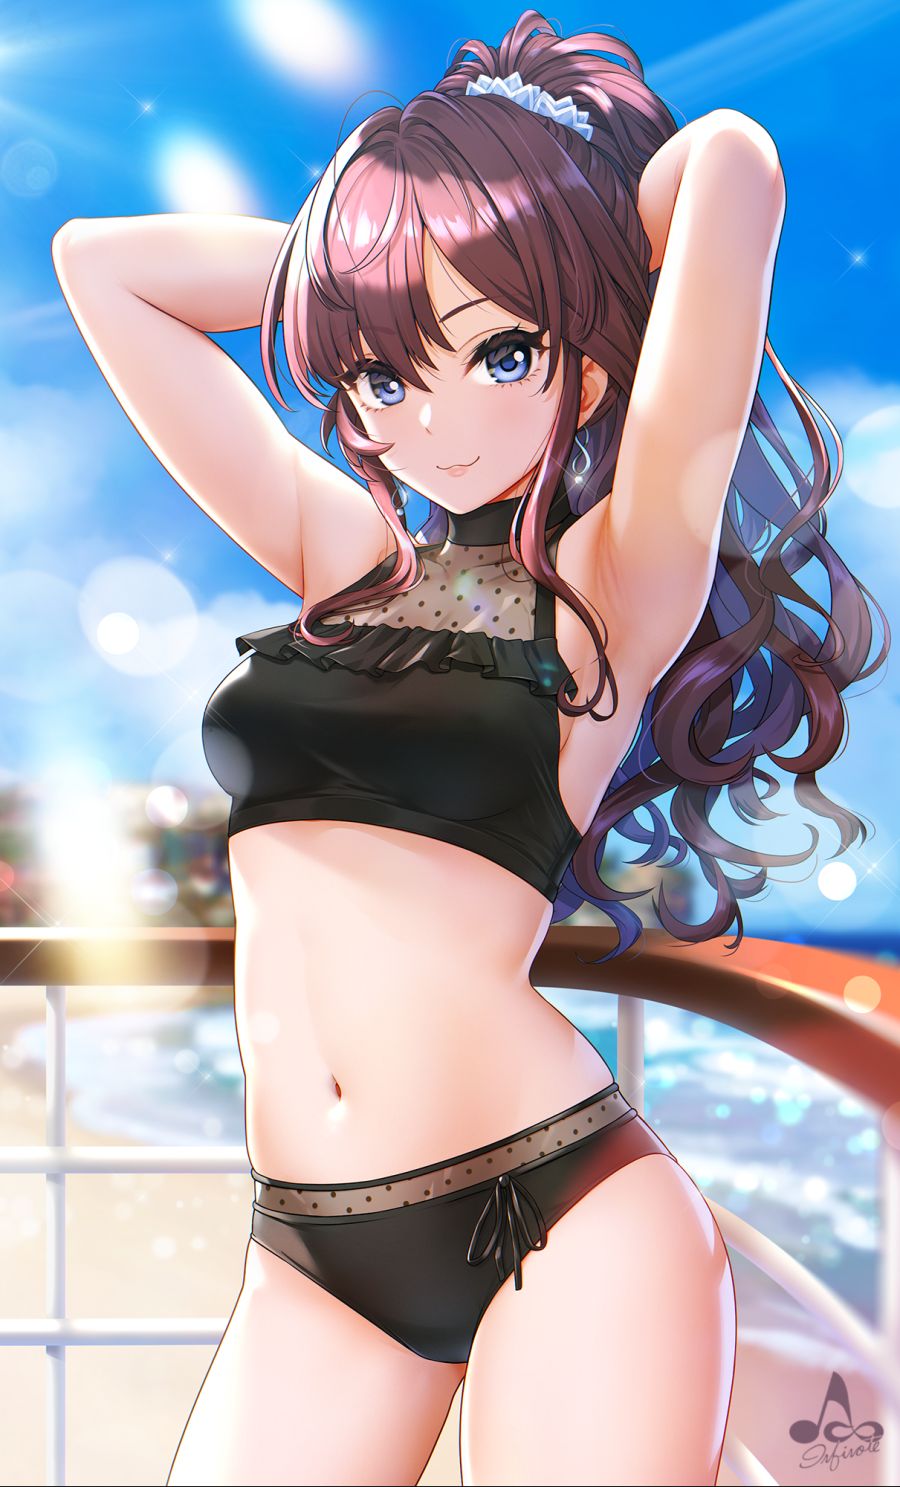 __ichinose_shiki_idolmaster_and_2_more_drawn_by_infinote__875d3f0d1014ba3fbe62a125612478ad.png